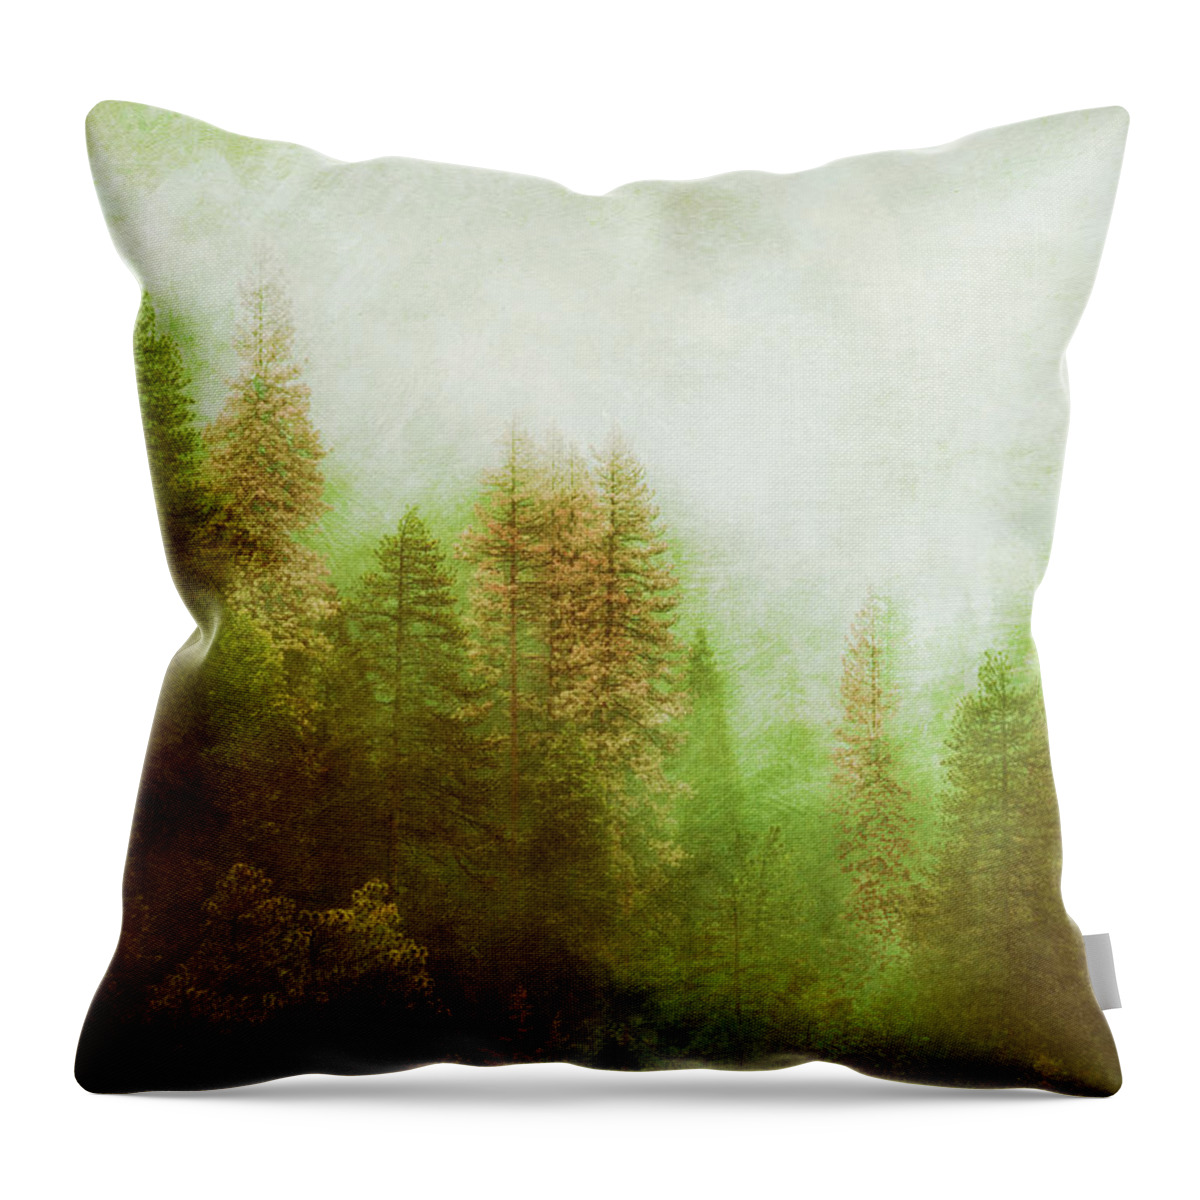 Nature Throw Pillow featuring the digital art Dreamy Summer Forest by Klara Acel